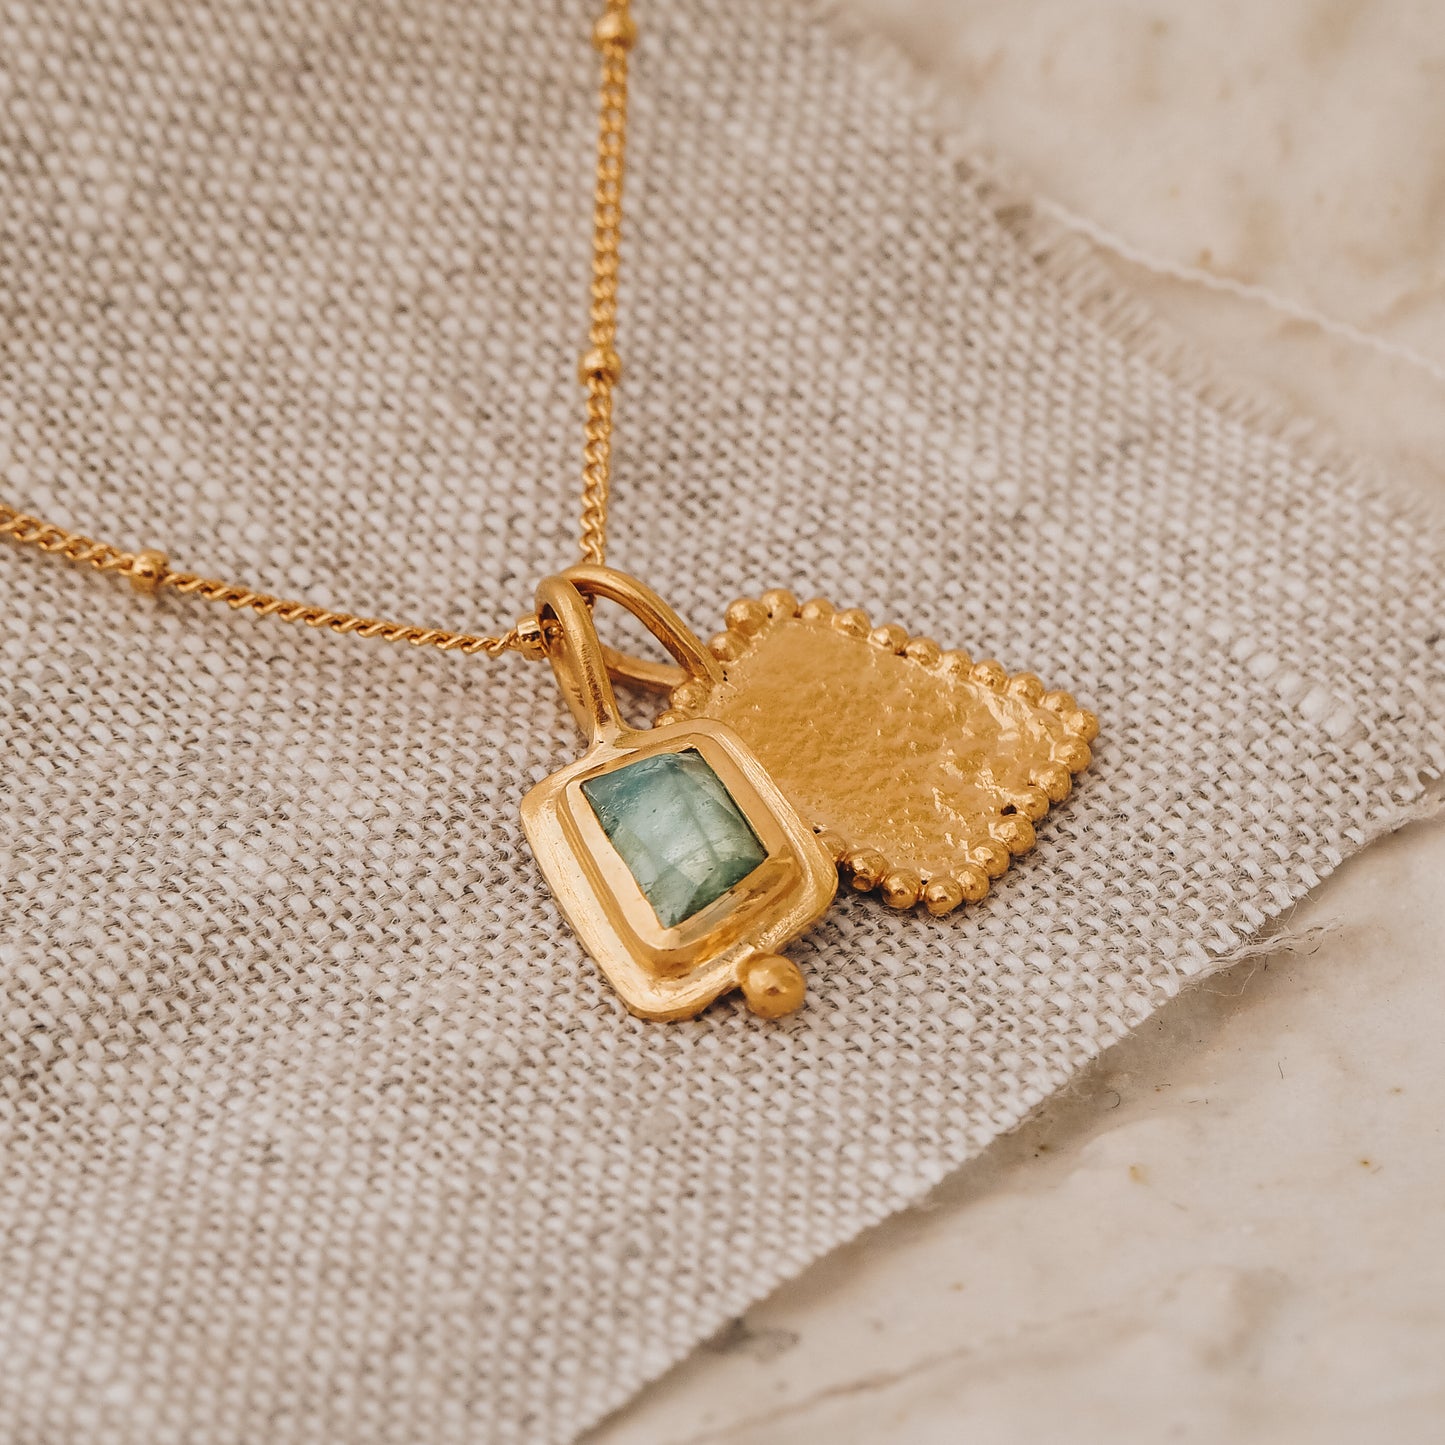 Handcrafted square gold pendant showcasing a captivating blue rose cut tourmaline gemstone and intricate granulation, hanging from a delicate satellite chain.